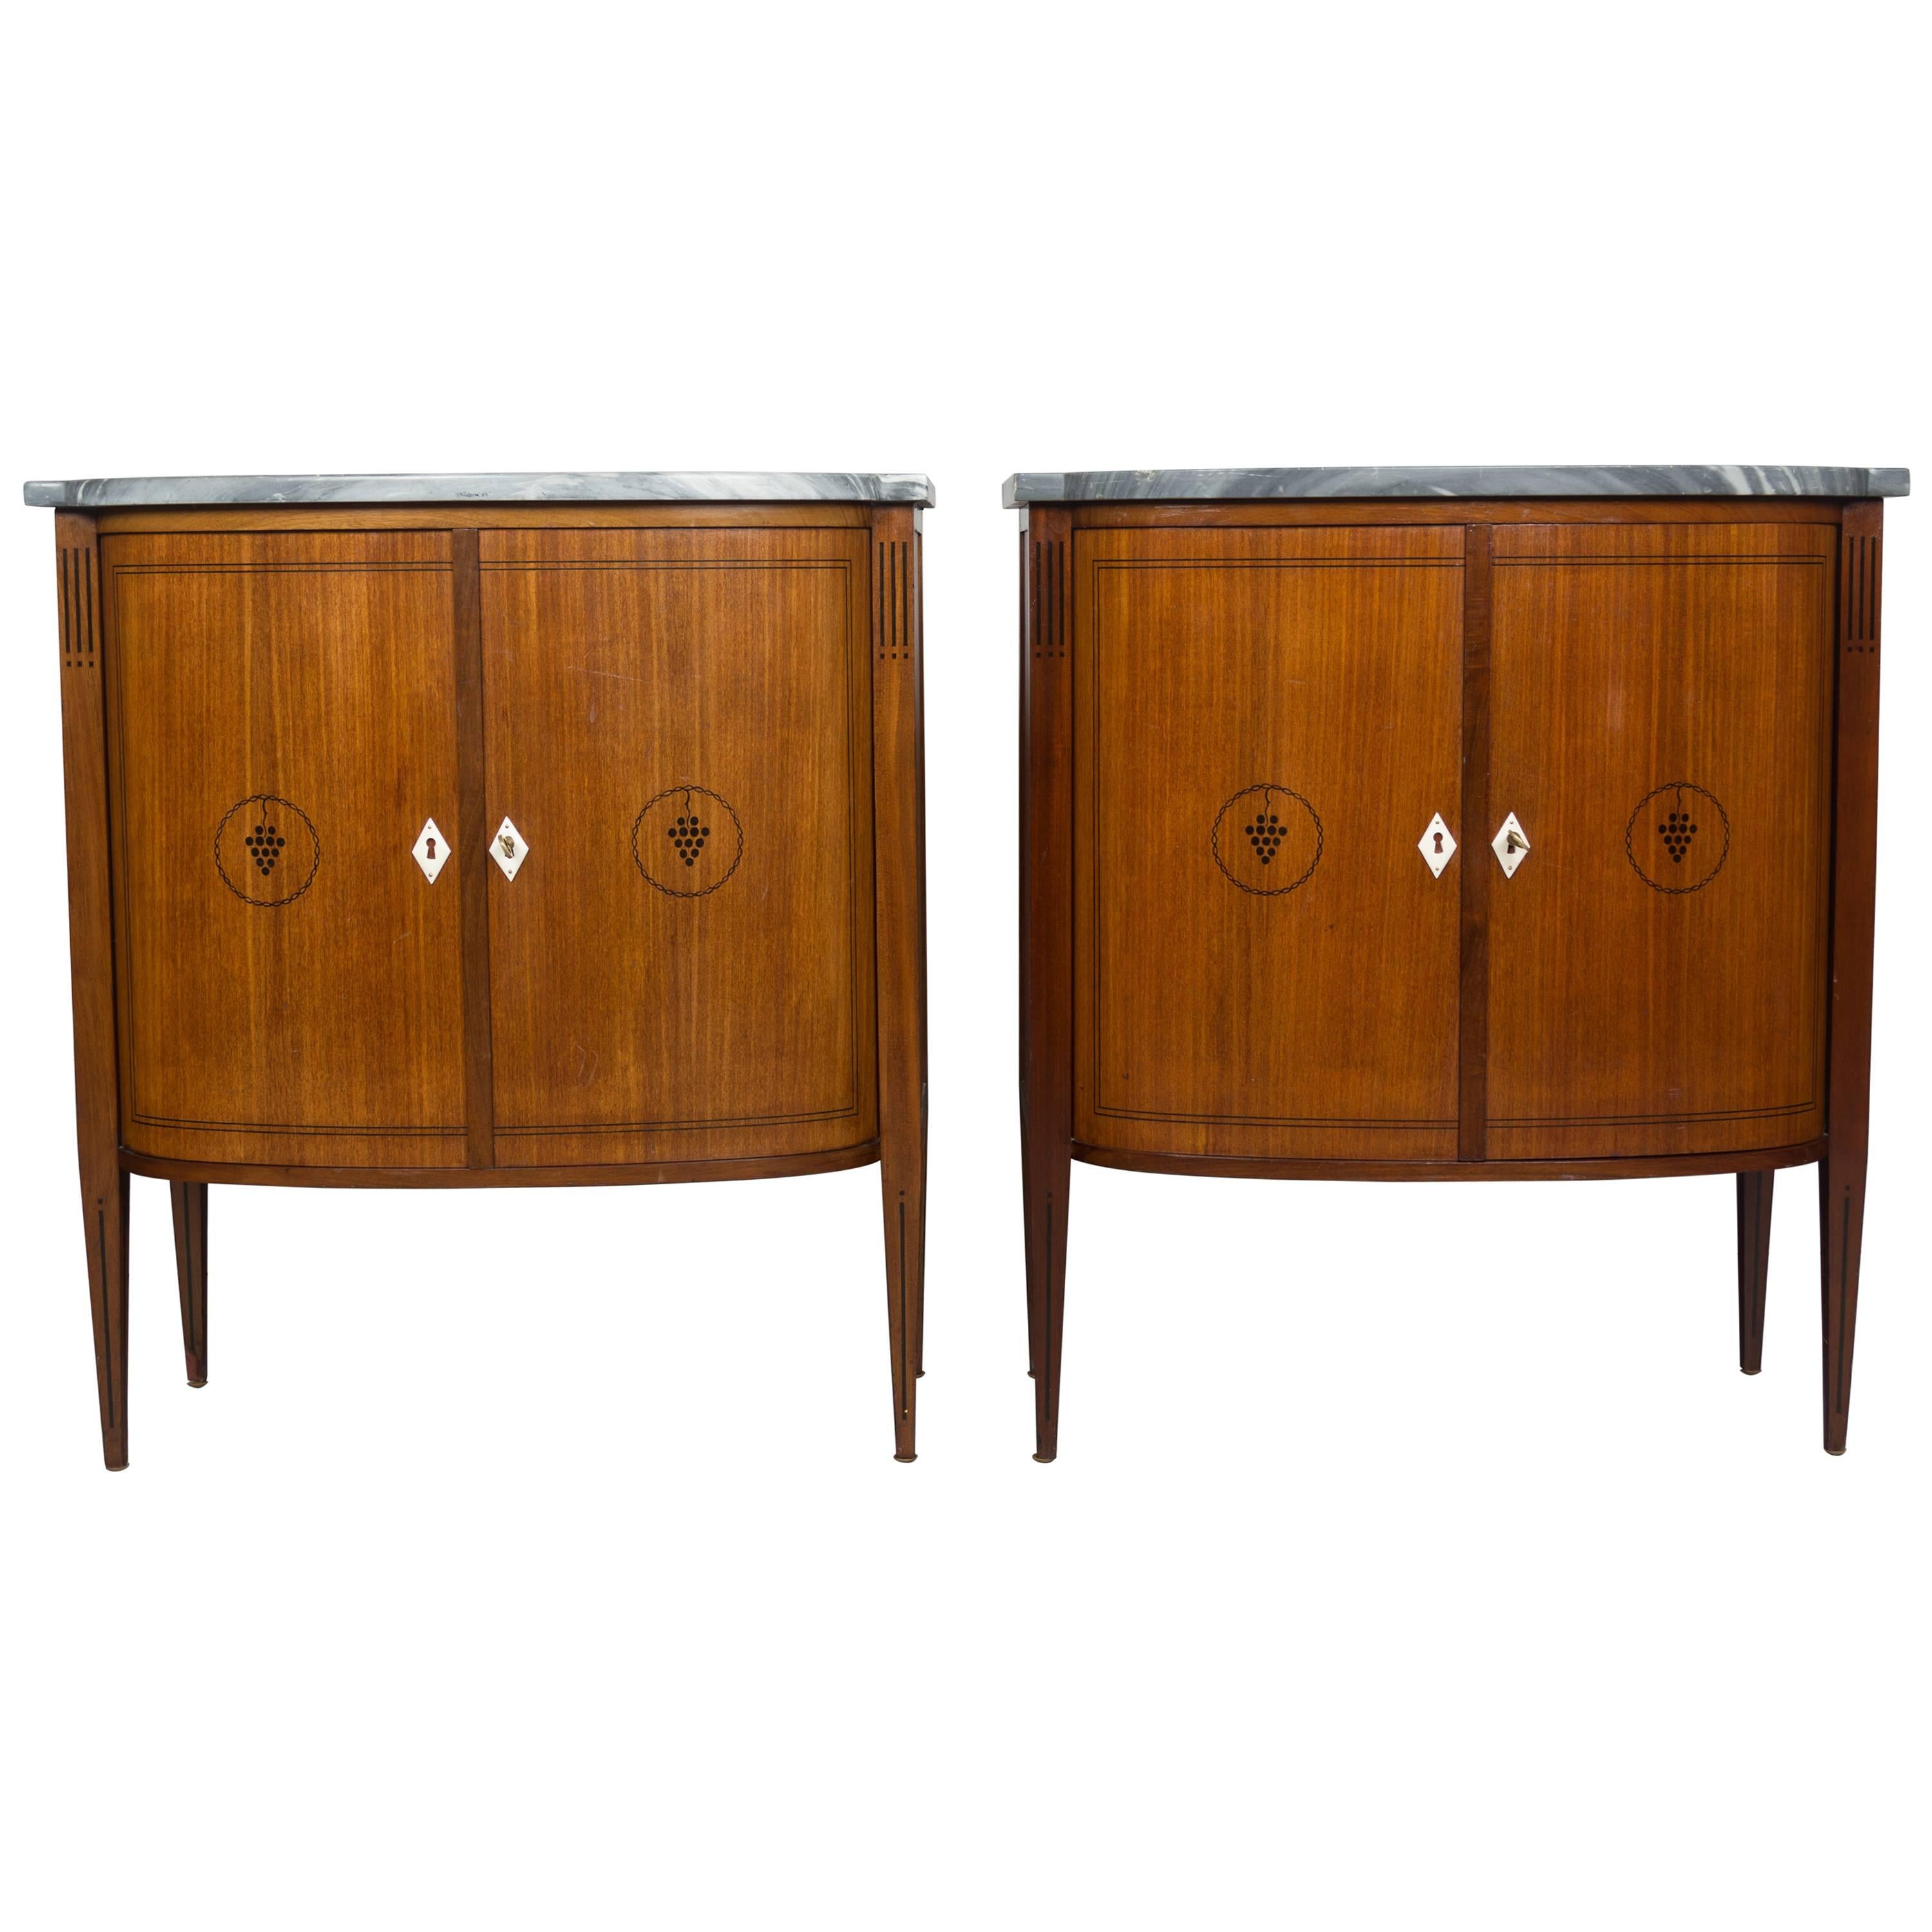 Pair of French Art Deco Style Cabinets